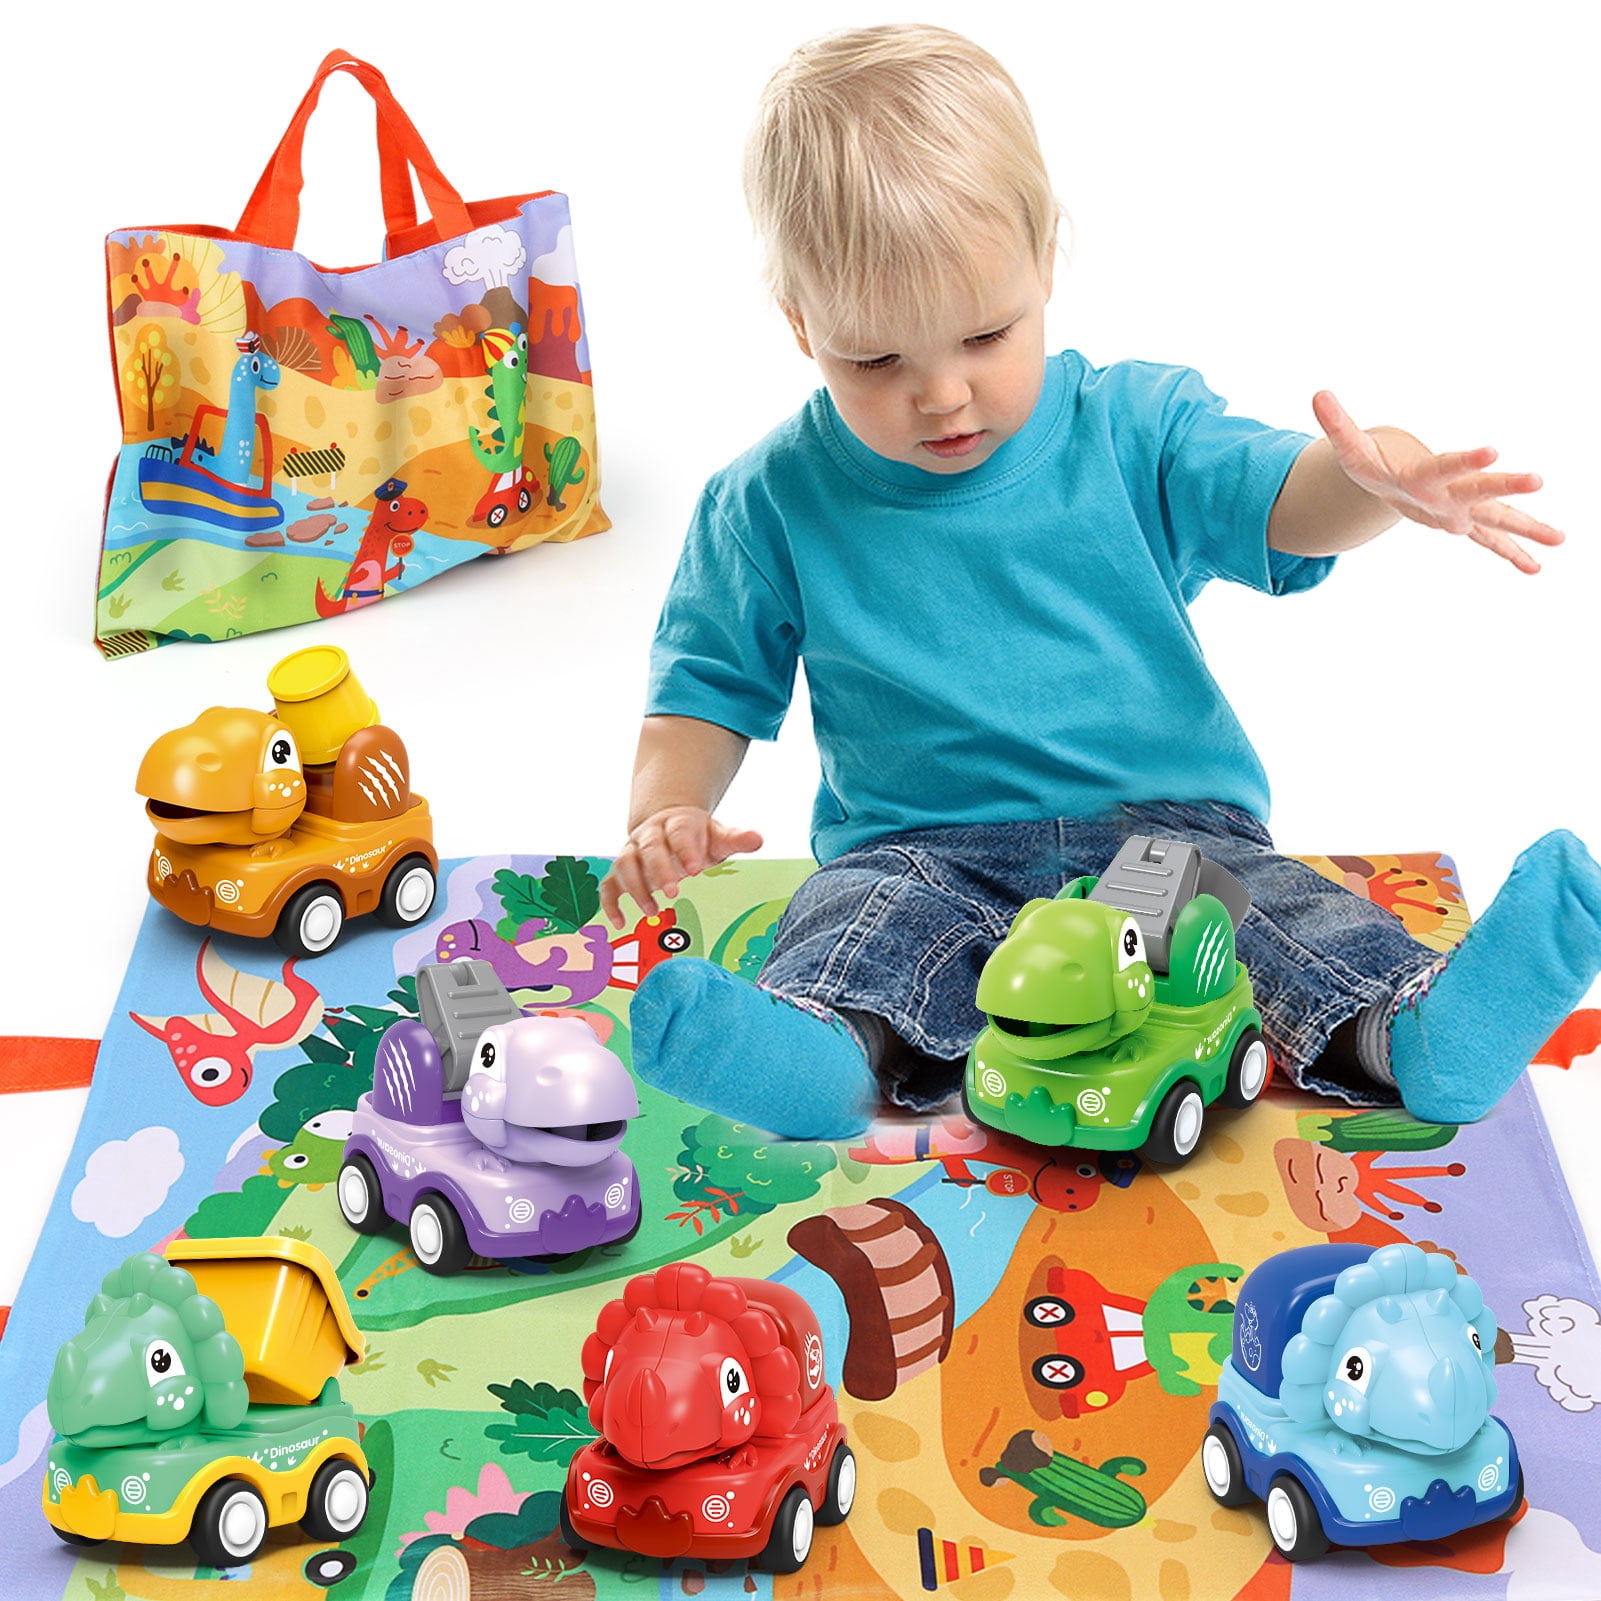 Toys for 2 Year Old Boys • The Pinning Mama